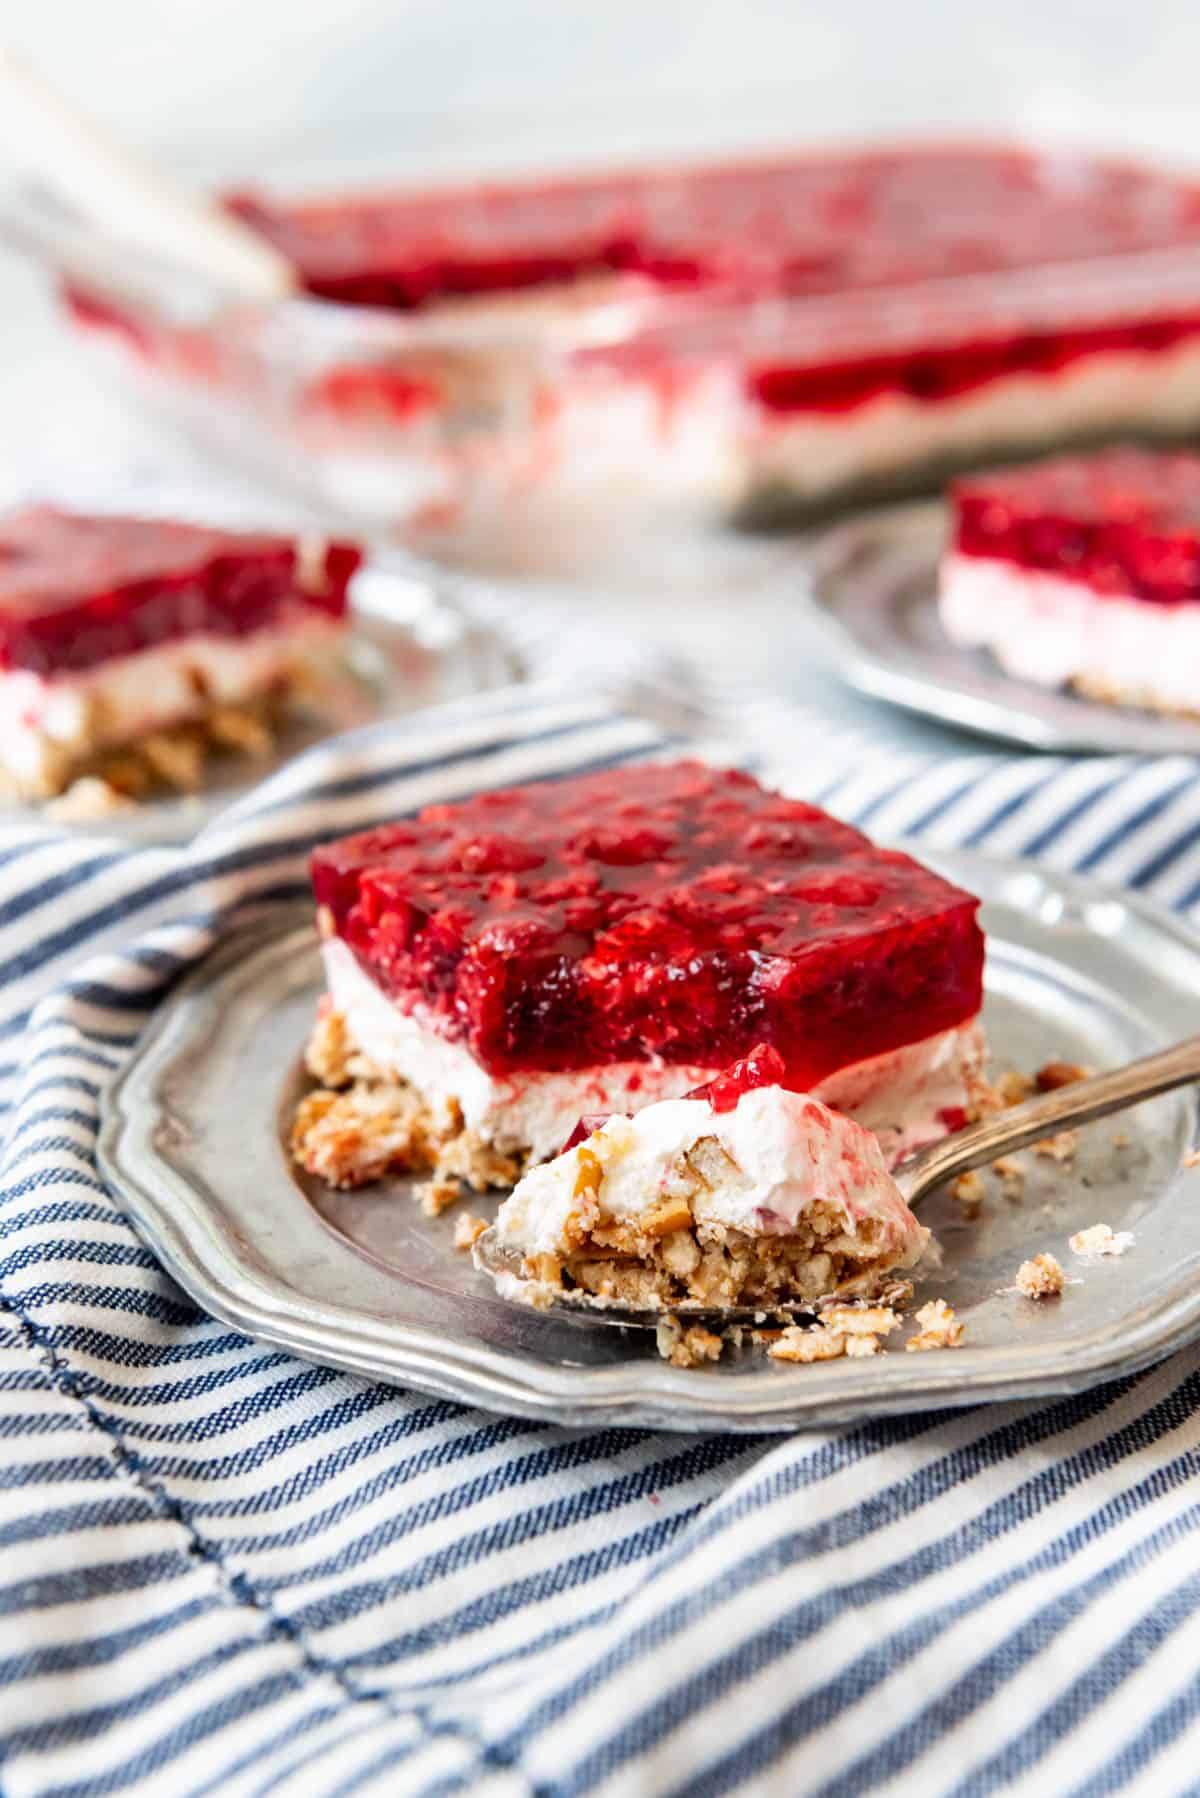 A slice of raspberry pretzel salad on a plate with a bite taken out of it.